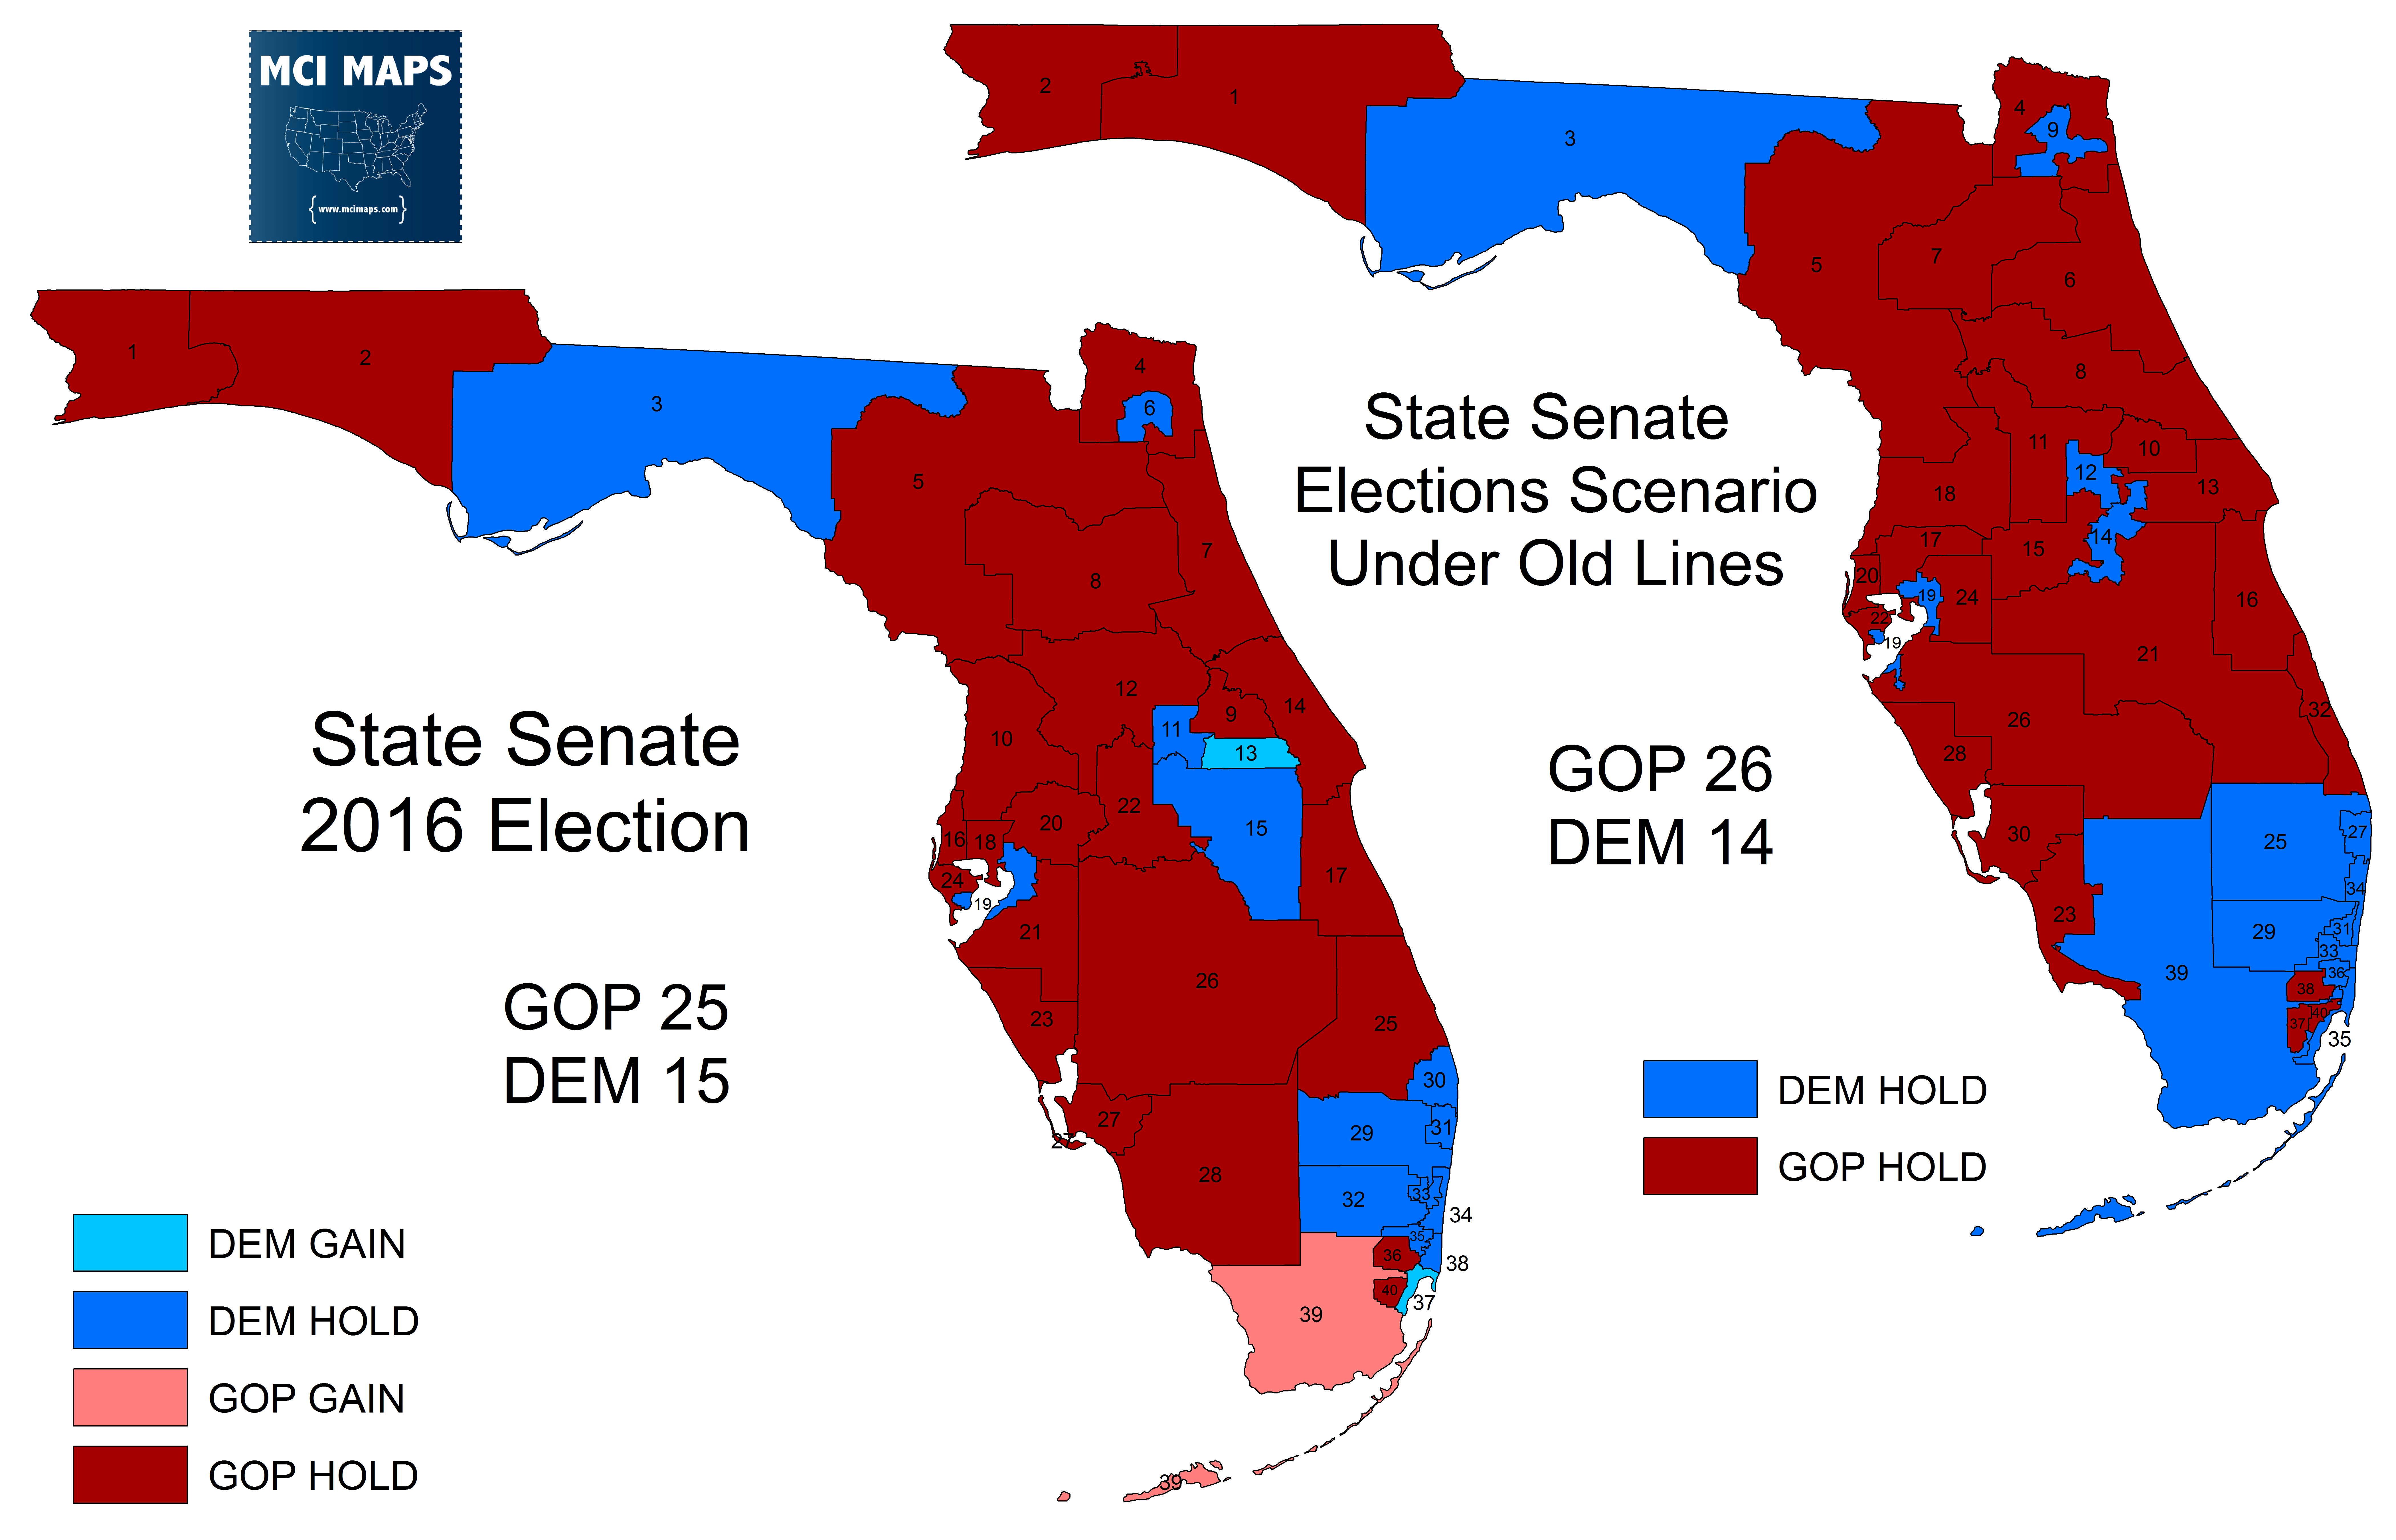 Presidential Results by Florida Senate District and the Impact of